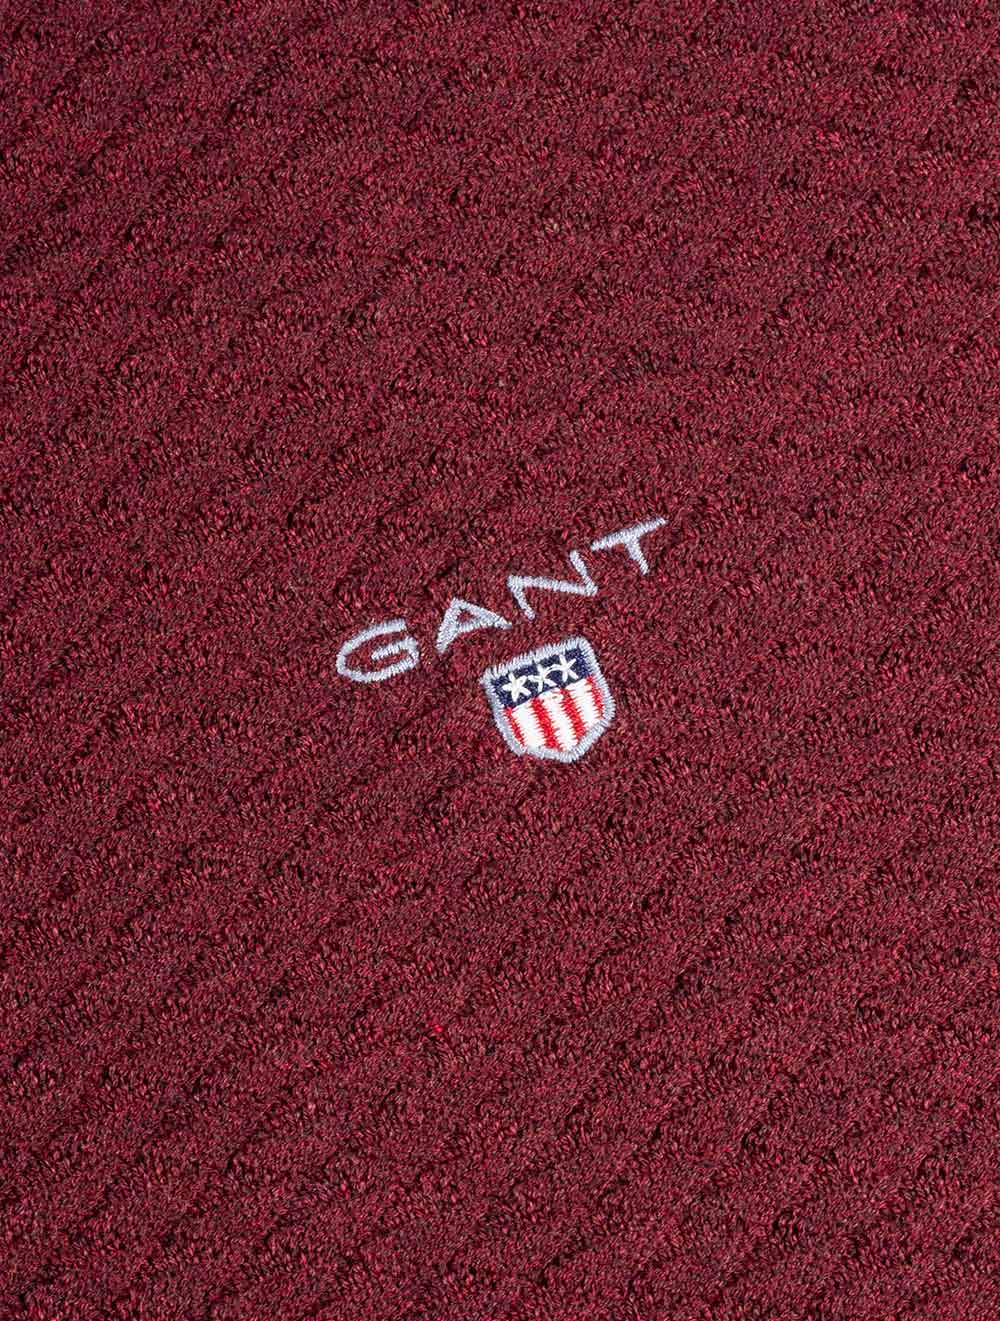 GANT Triangle Texture Crew Neck Sweater in Royal Port Red